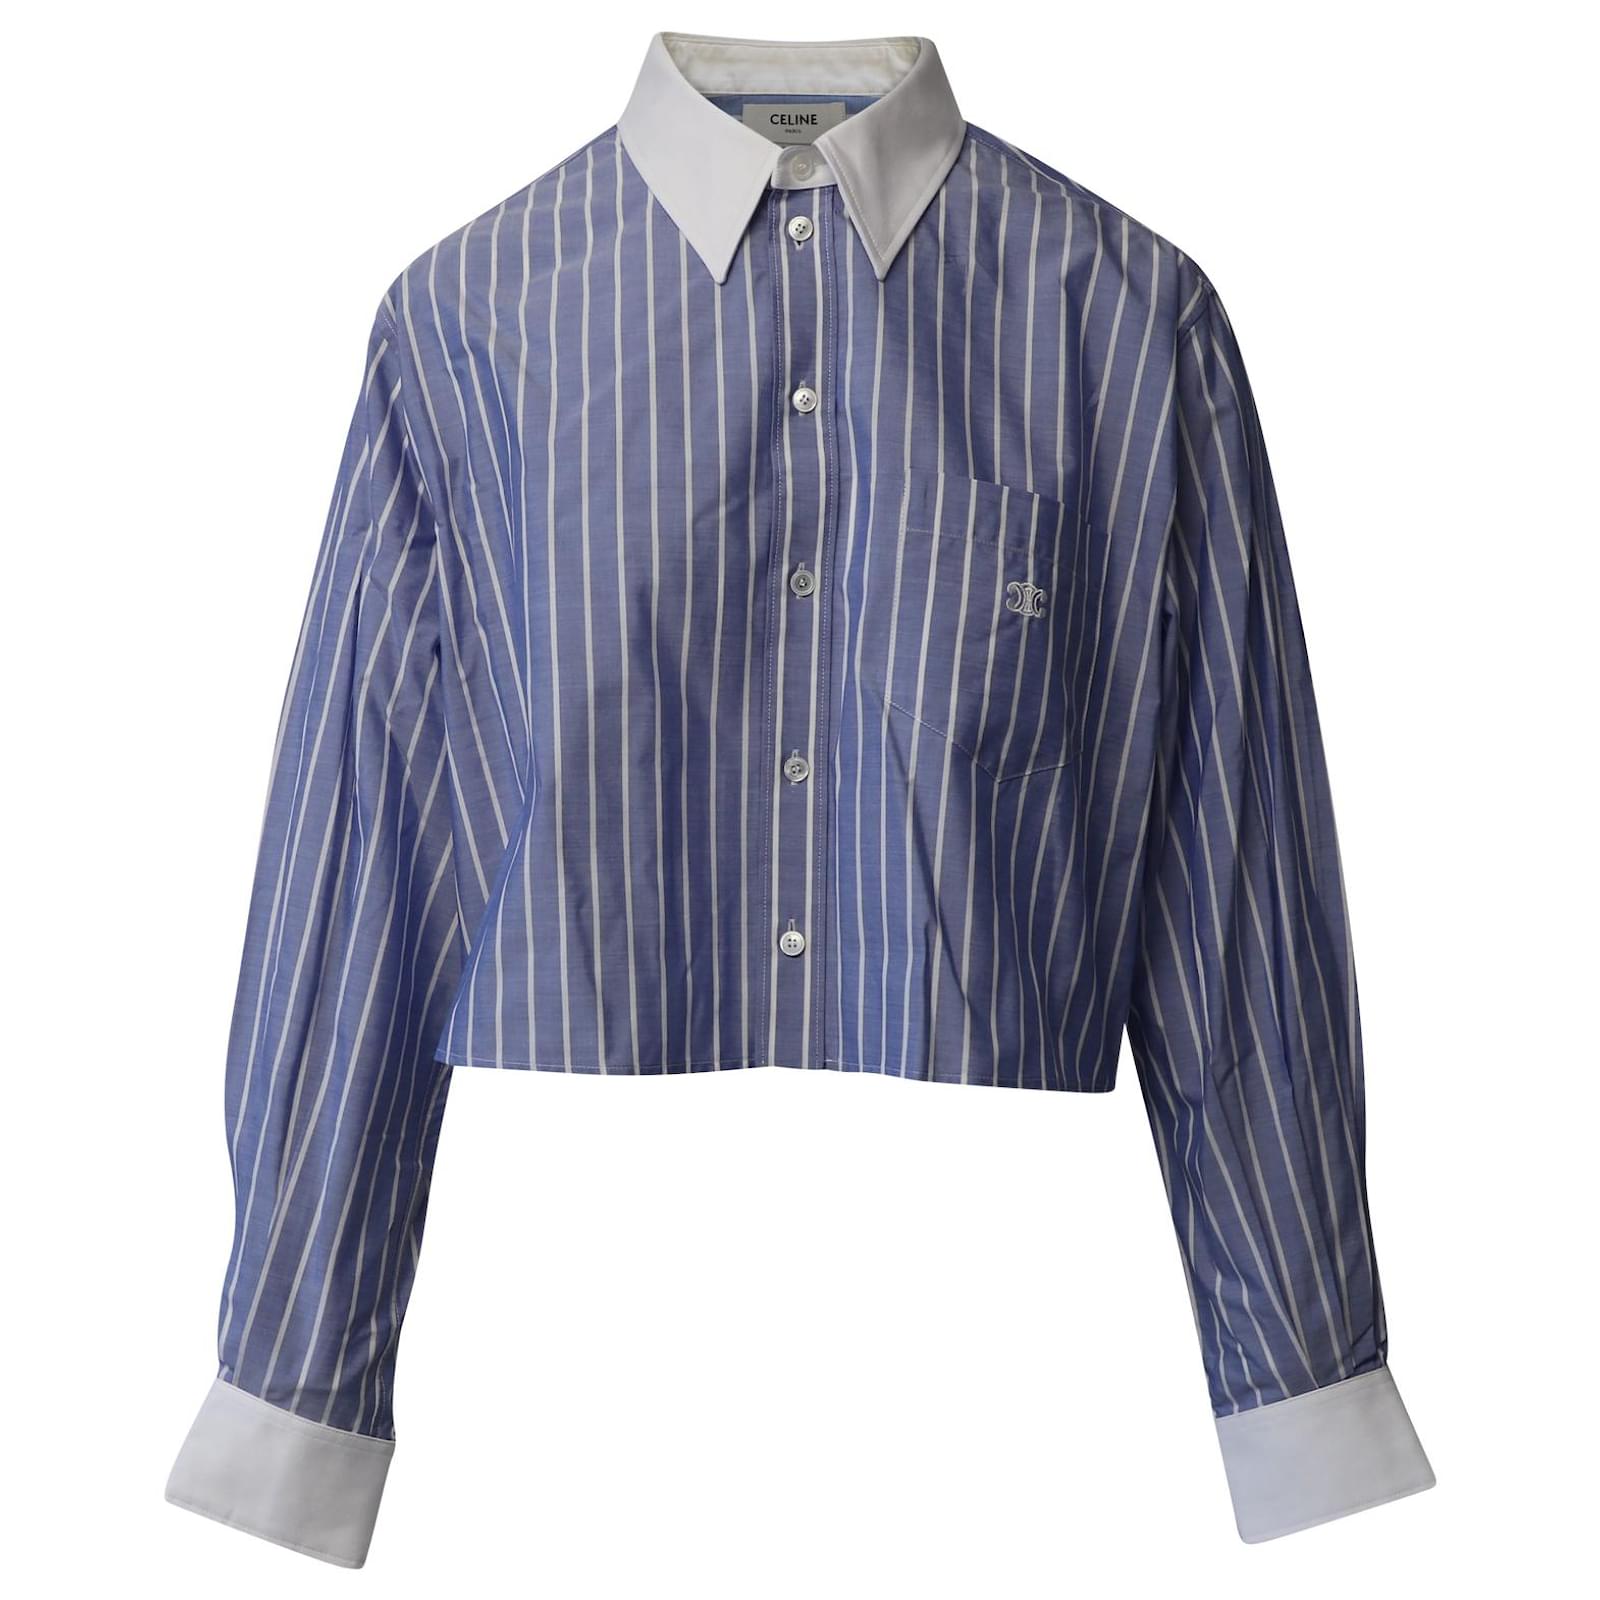 Celine Striped Cropped Shirt in Light Blue Cotton